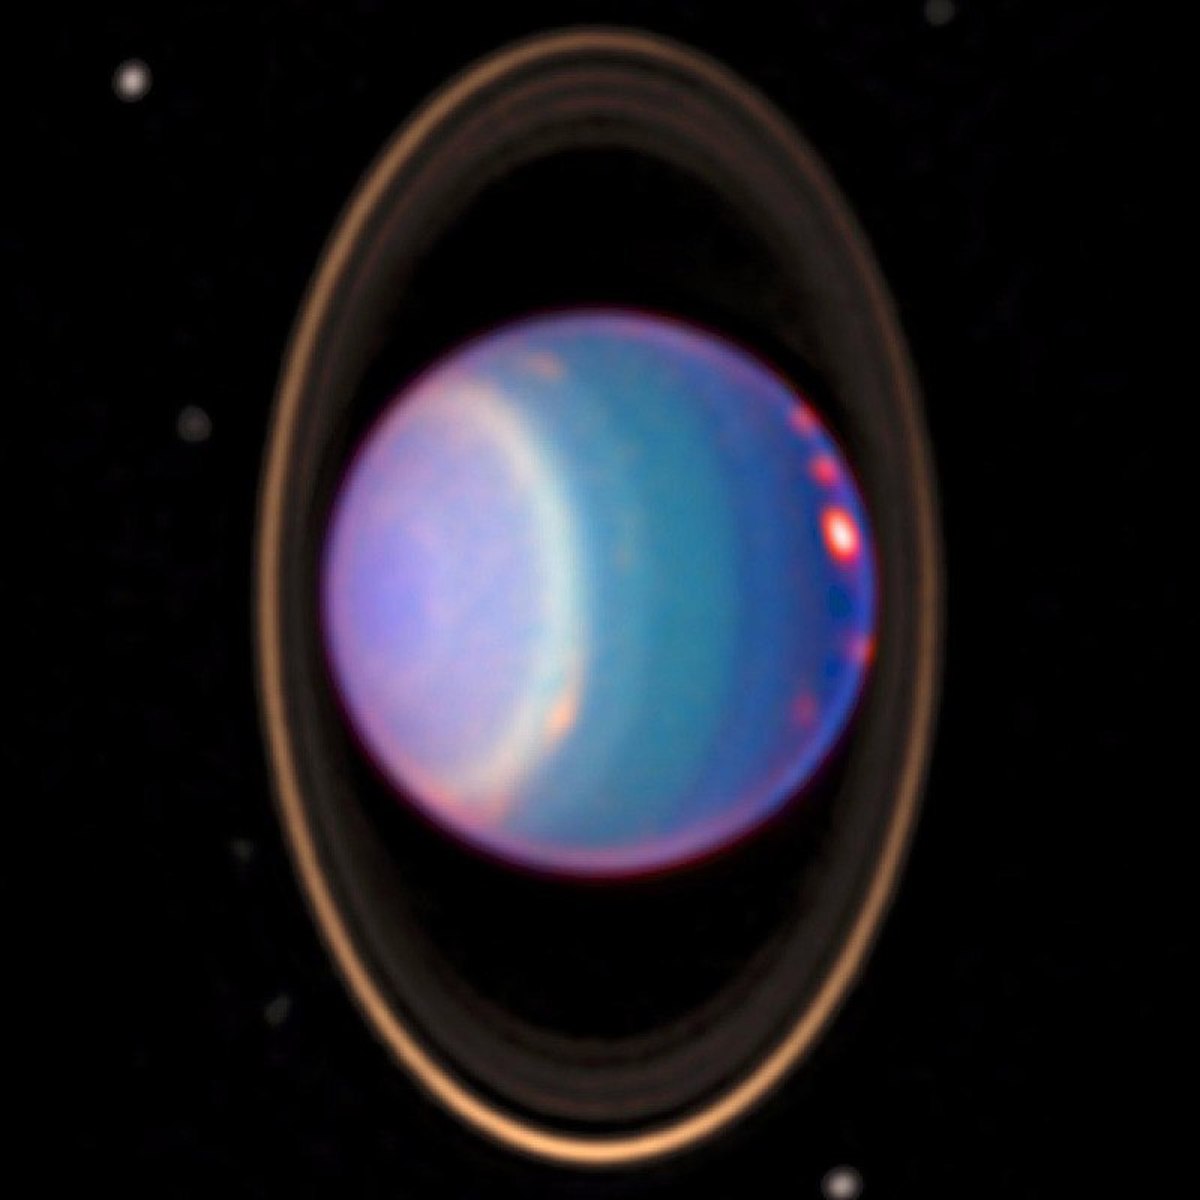 Infrared image of Uranus taken by the Hubble Space Telescope. This infrared snapshot highlights the extraordinary ring system that surrounds Uranus.